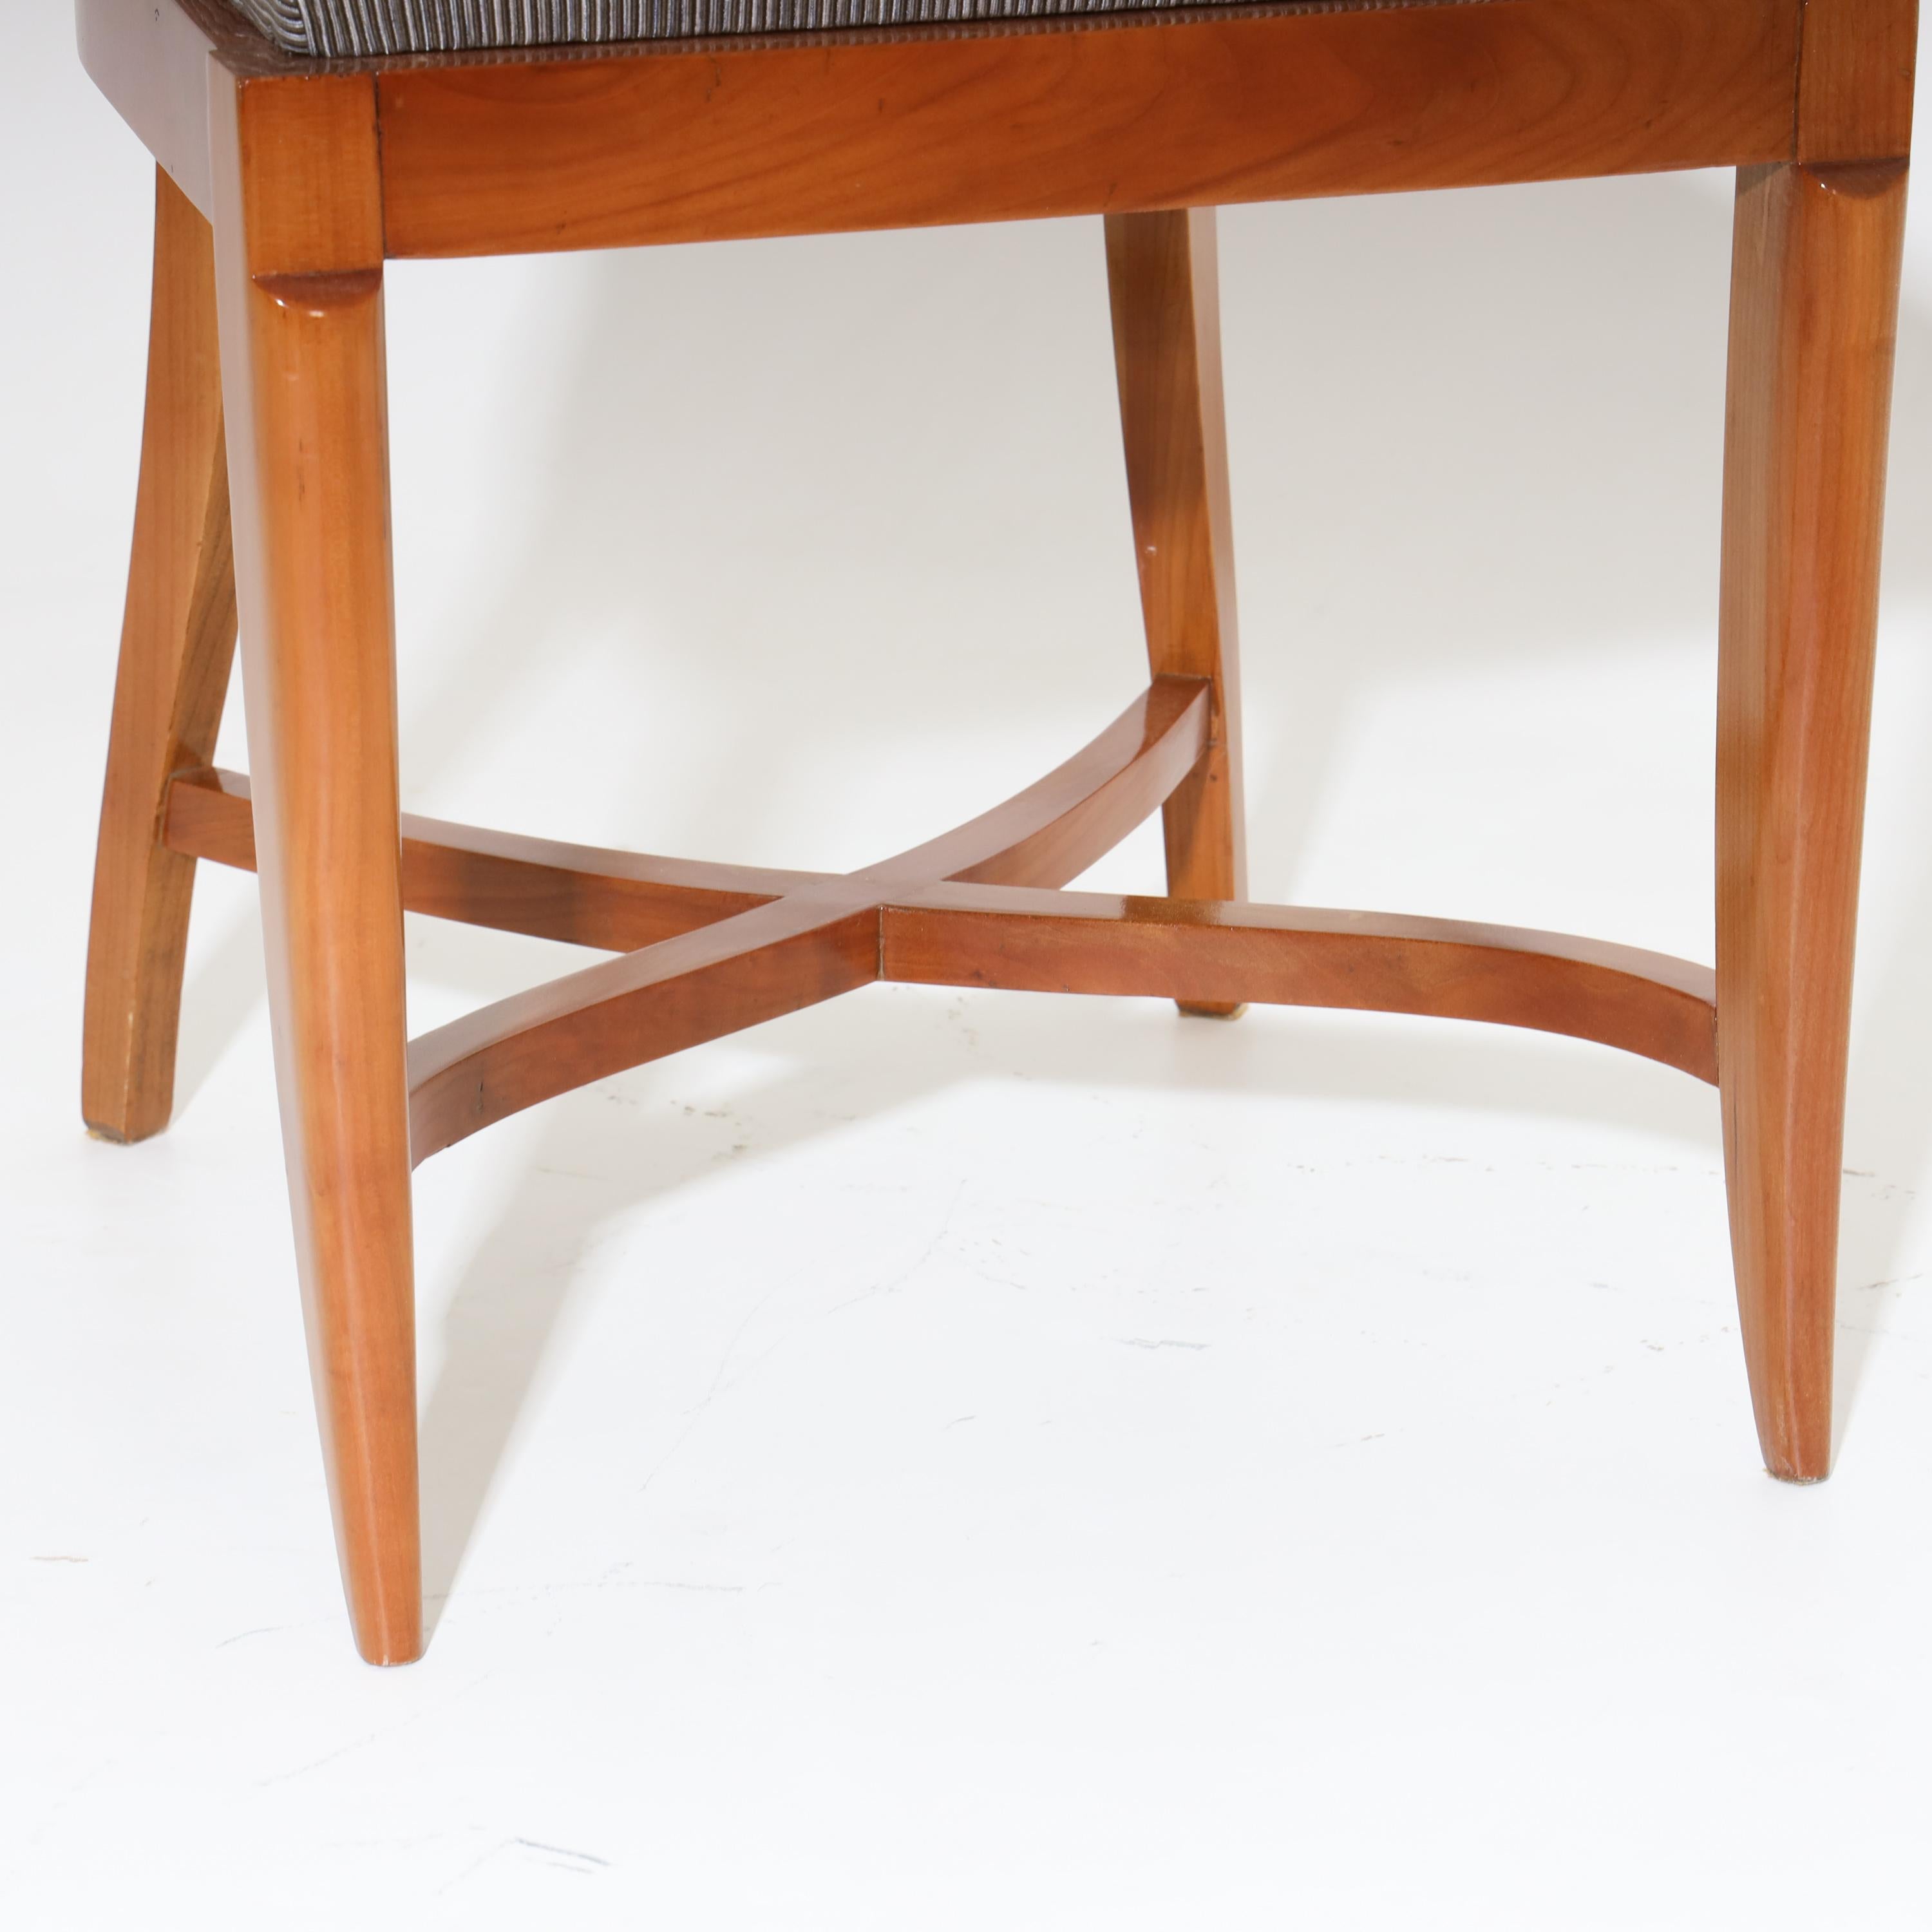 Mid-20th Century Art Deco Chairs, Cherry, France, 1940s For Sale